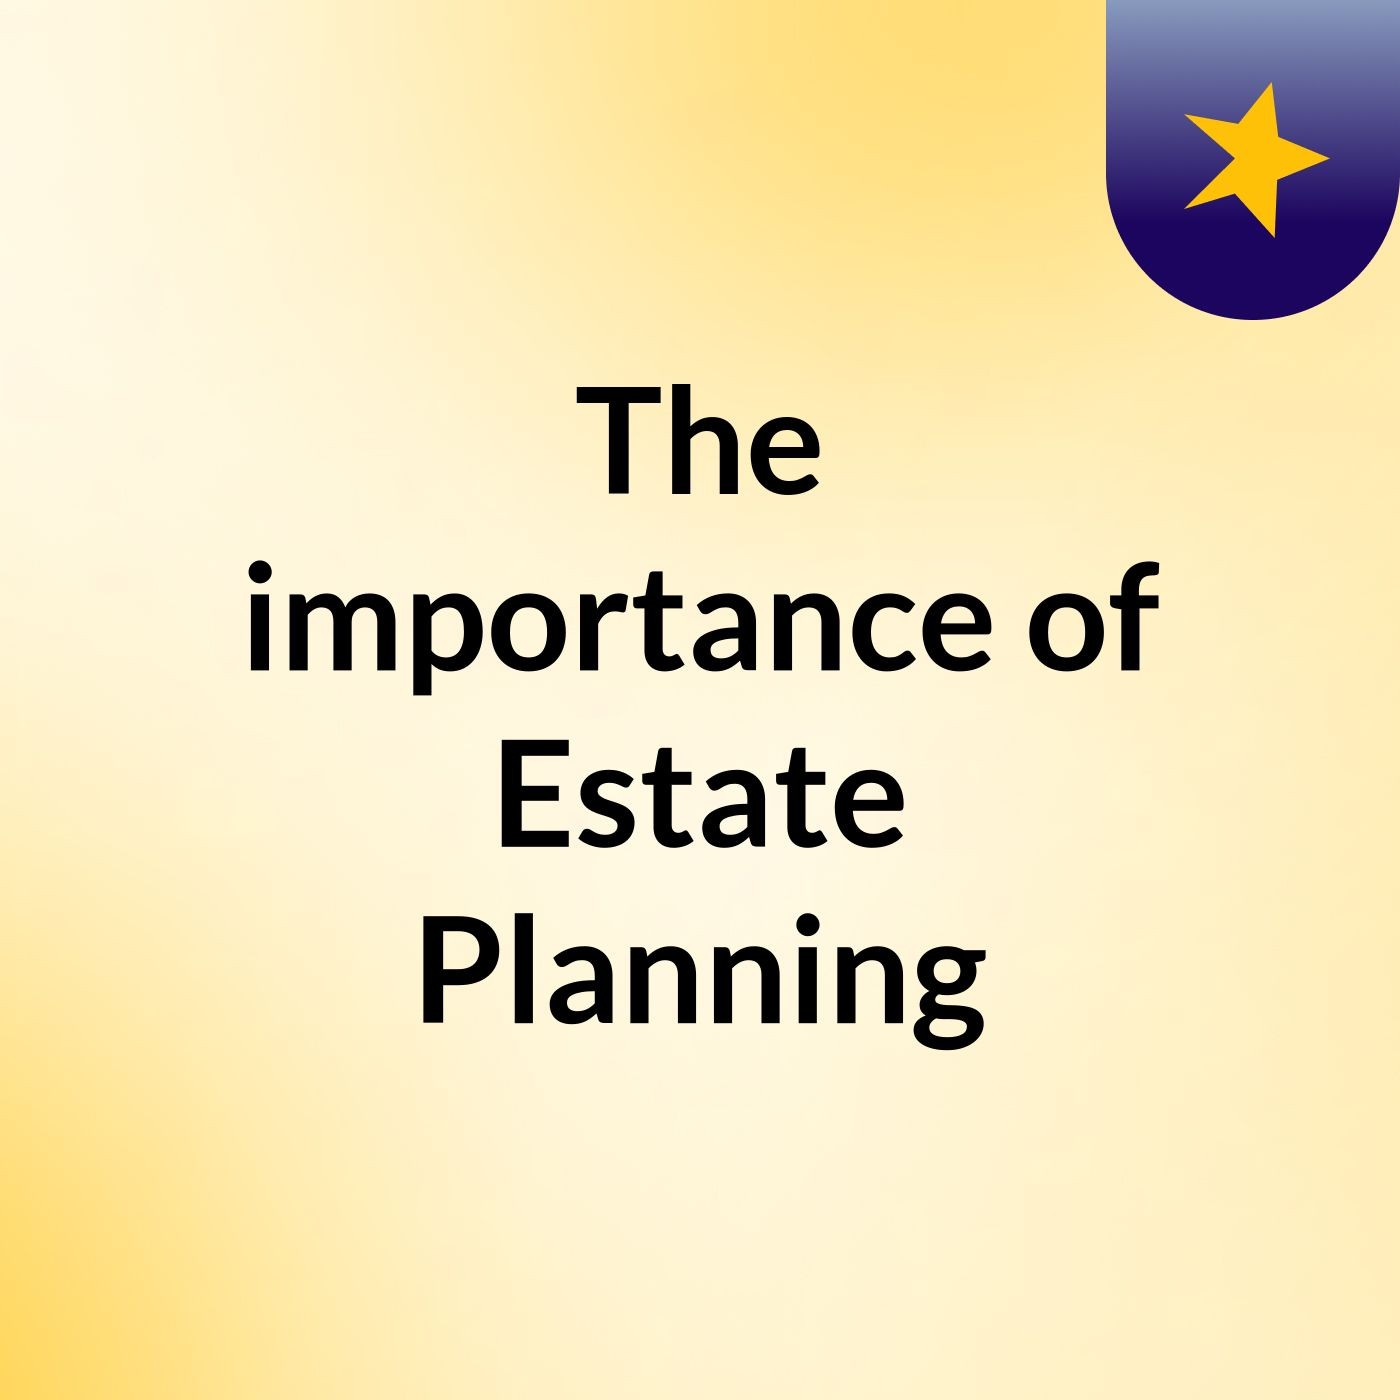 The importance of Estate Planning